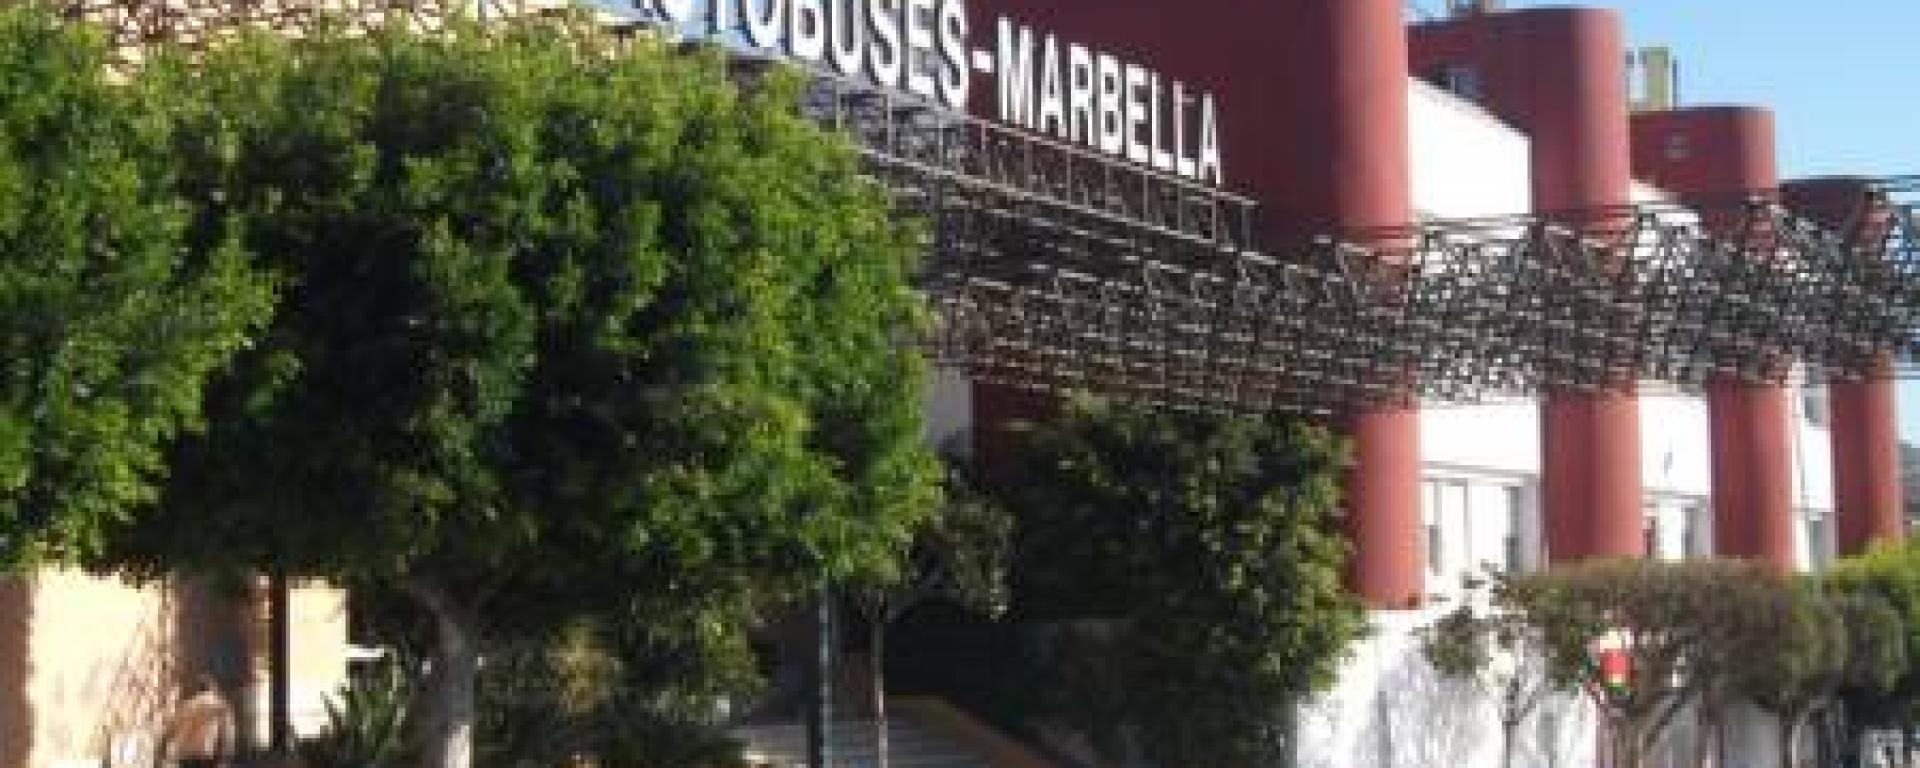 How to get to Louis Vuitton in Marbella by Bus?